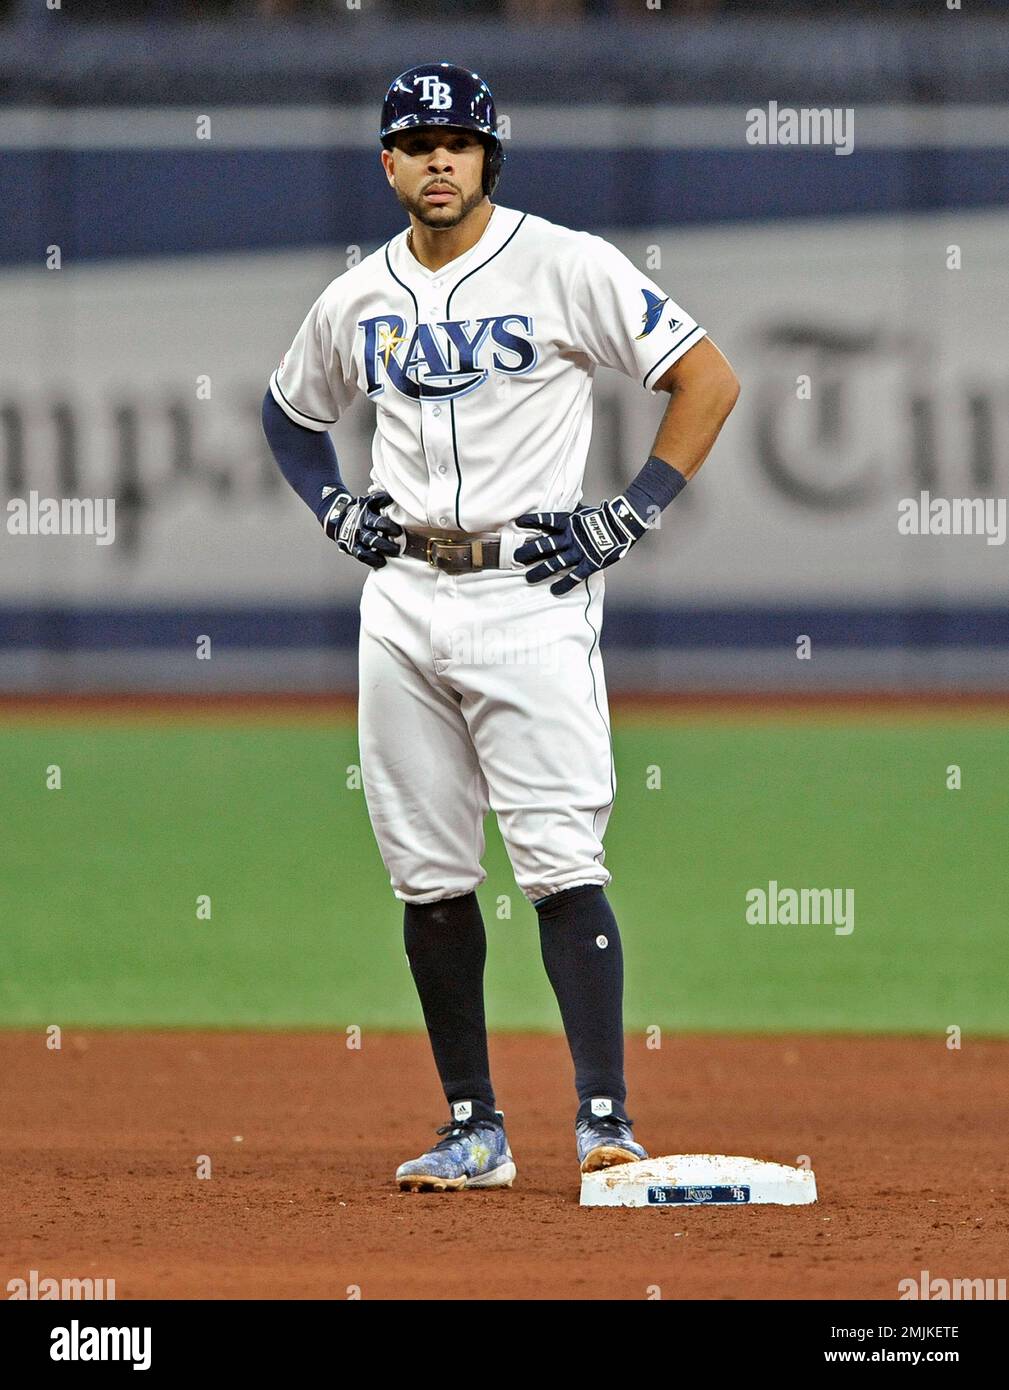 Tampa Bay Rays' Tommy Pham stands on second base after hitting a